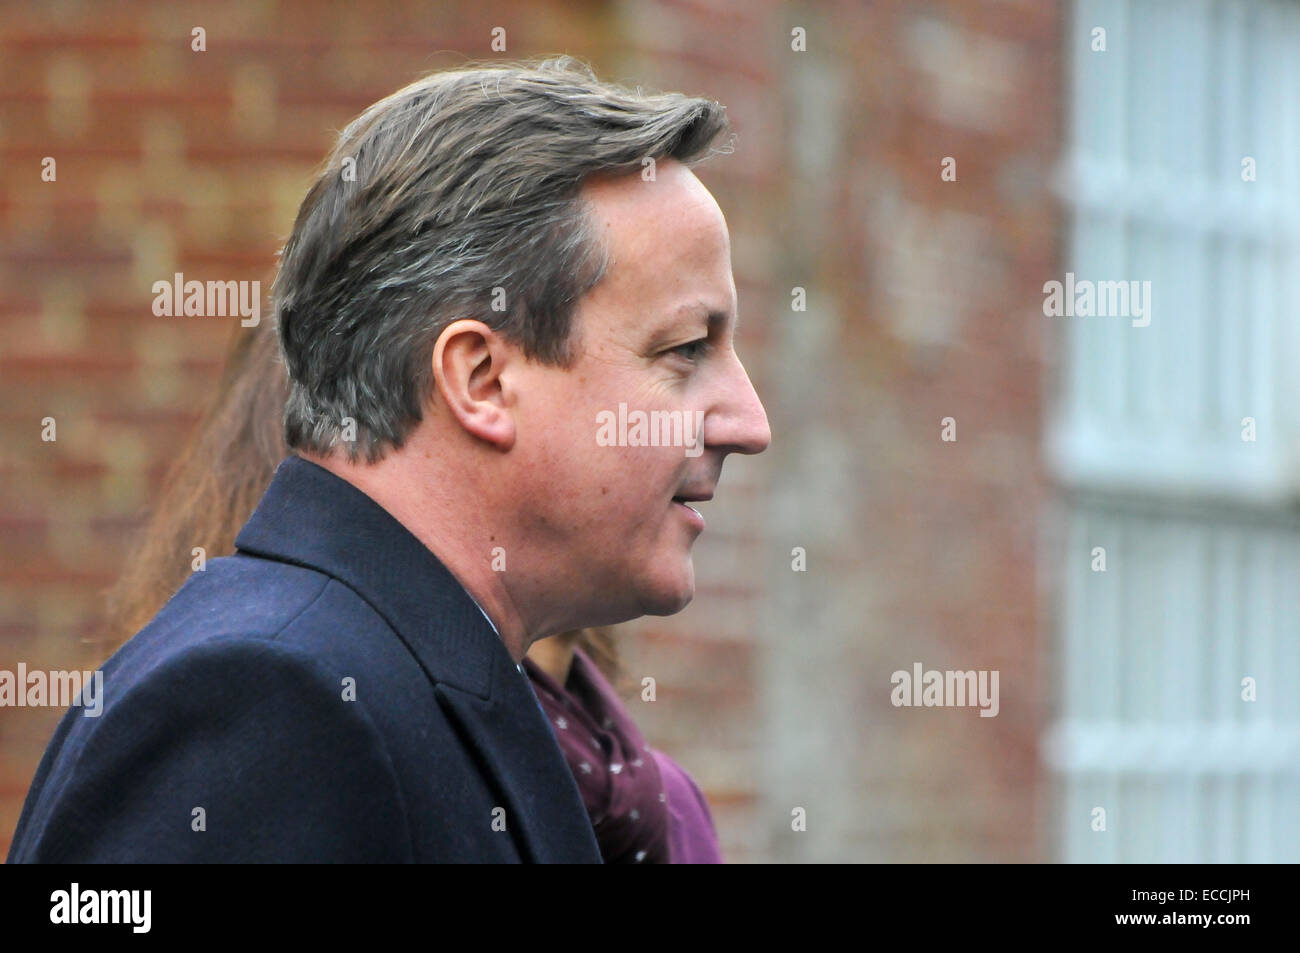 Belfast, Northern Ireland, UK. 11th December, 2014. Prime Minister David Cameron gives a brief statement to the waiting media in Belfast as he arrives for crucial cross-party talks to try to break the stalemate within the Stormont Assembly.  It is believed that if an agreement cannot be met that the Stormont Assembly will collapse. Credit:  Stephen Barnes/Alamy Live News Stock Photo